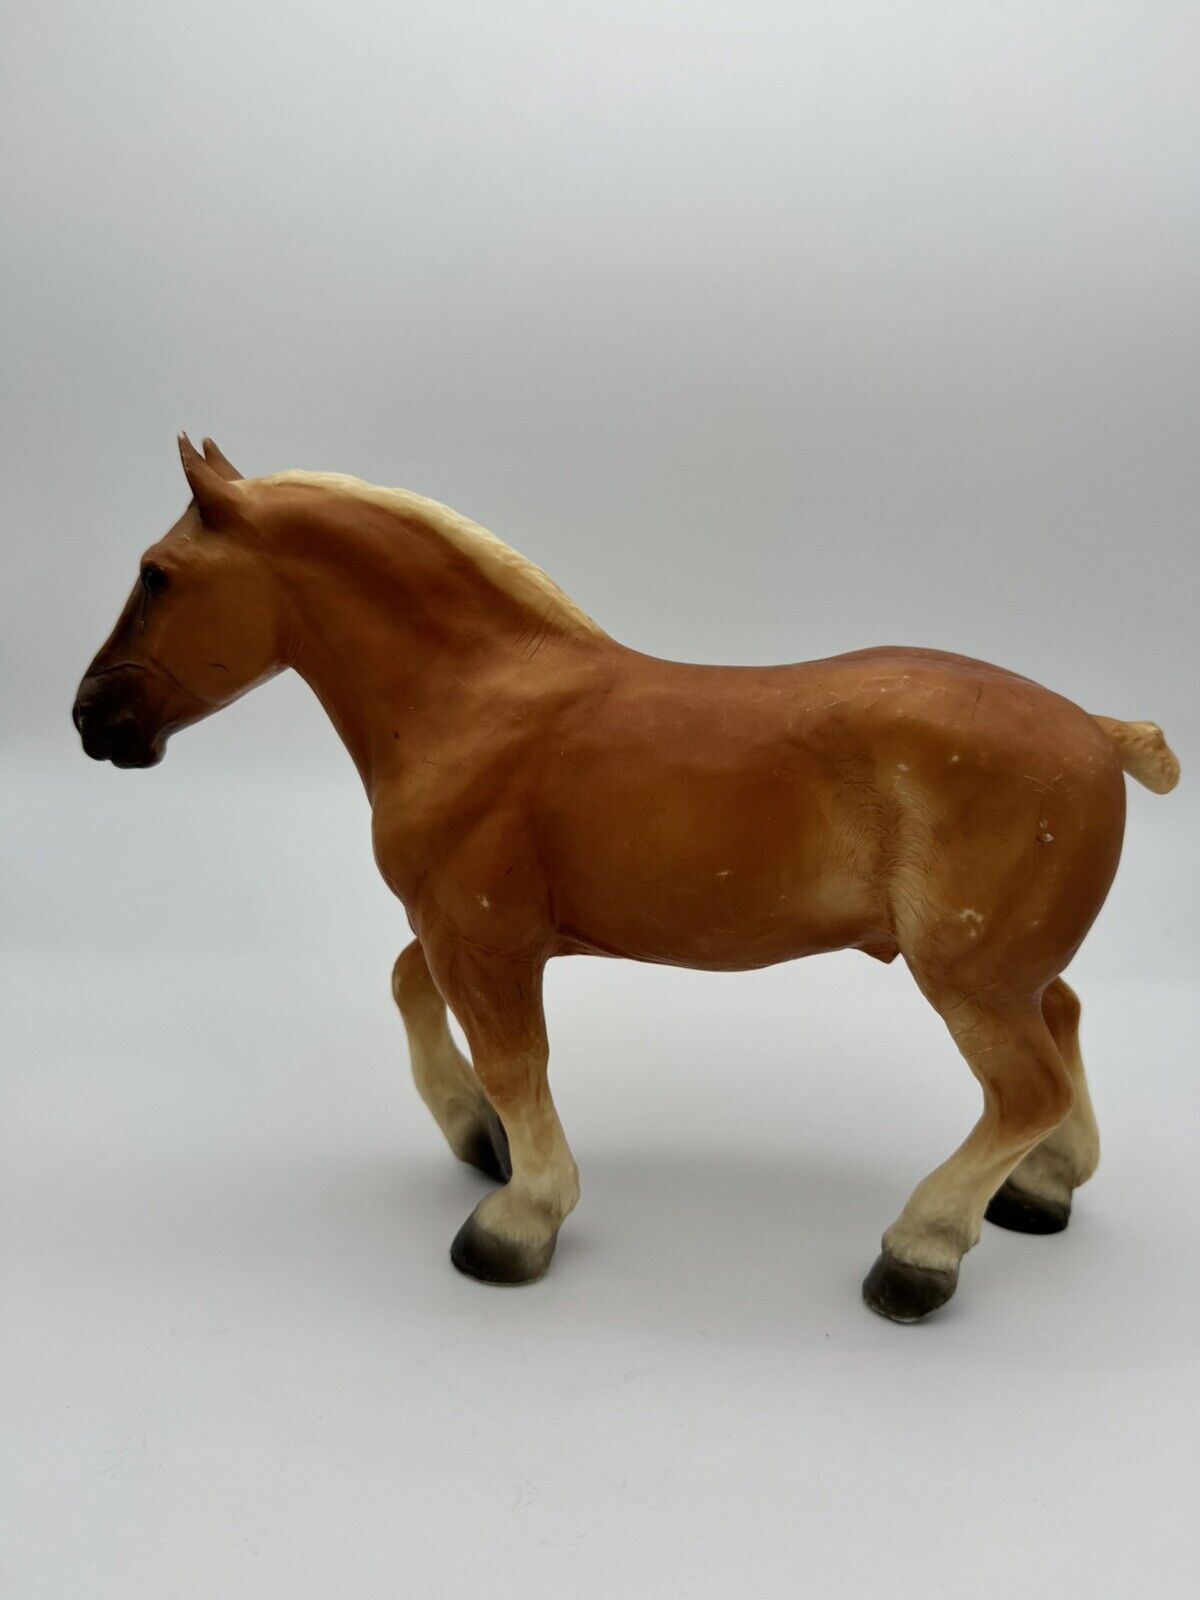 Breyer Traditional Roy the drafter #455 produced 1989